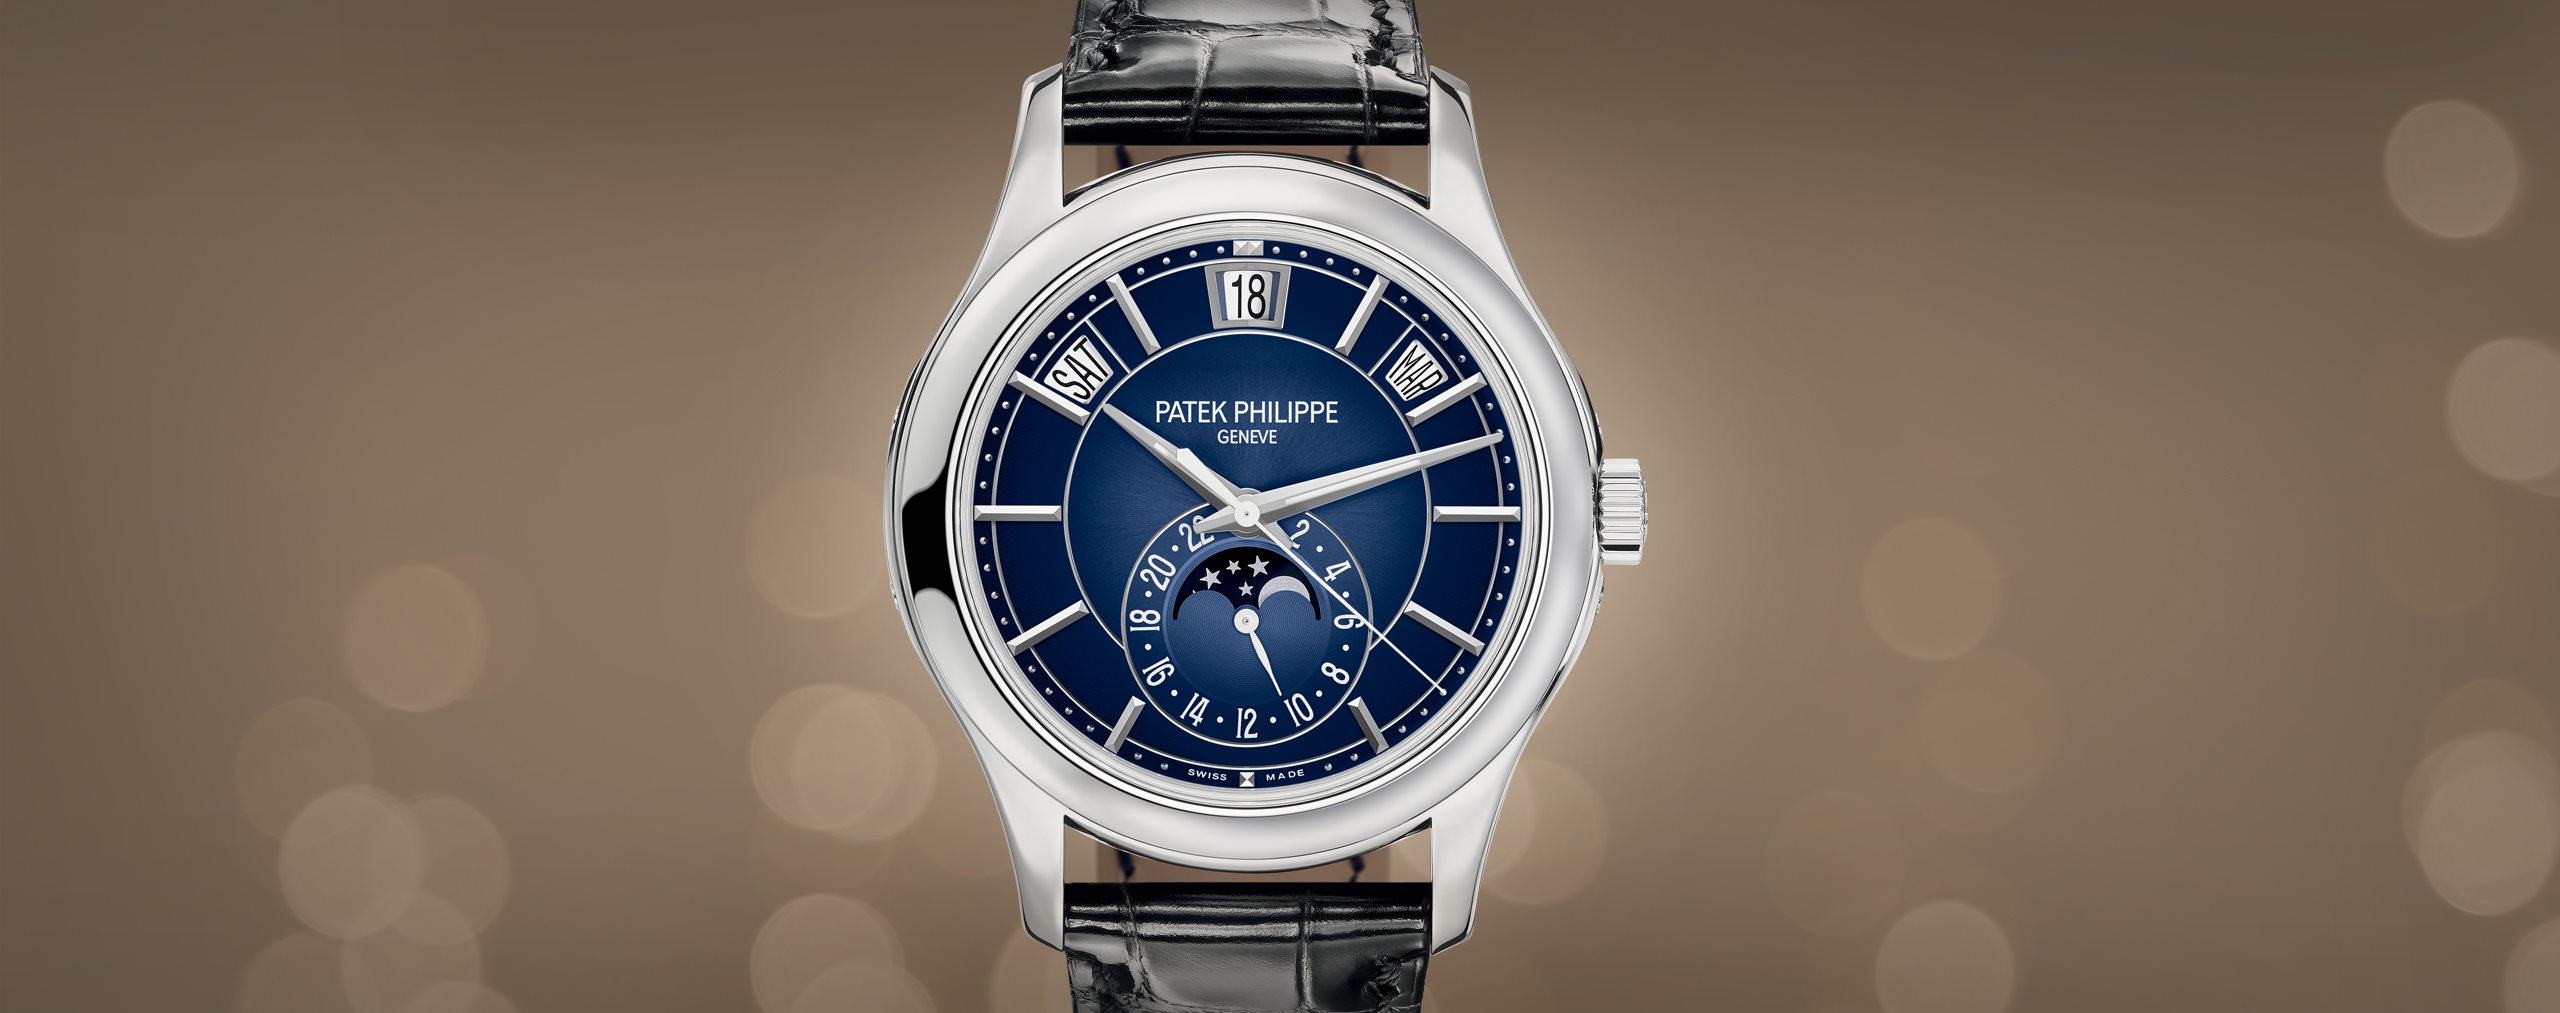 Patek Philippe Fake Watch For Sale